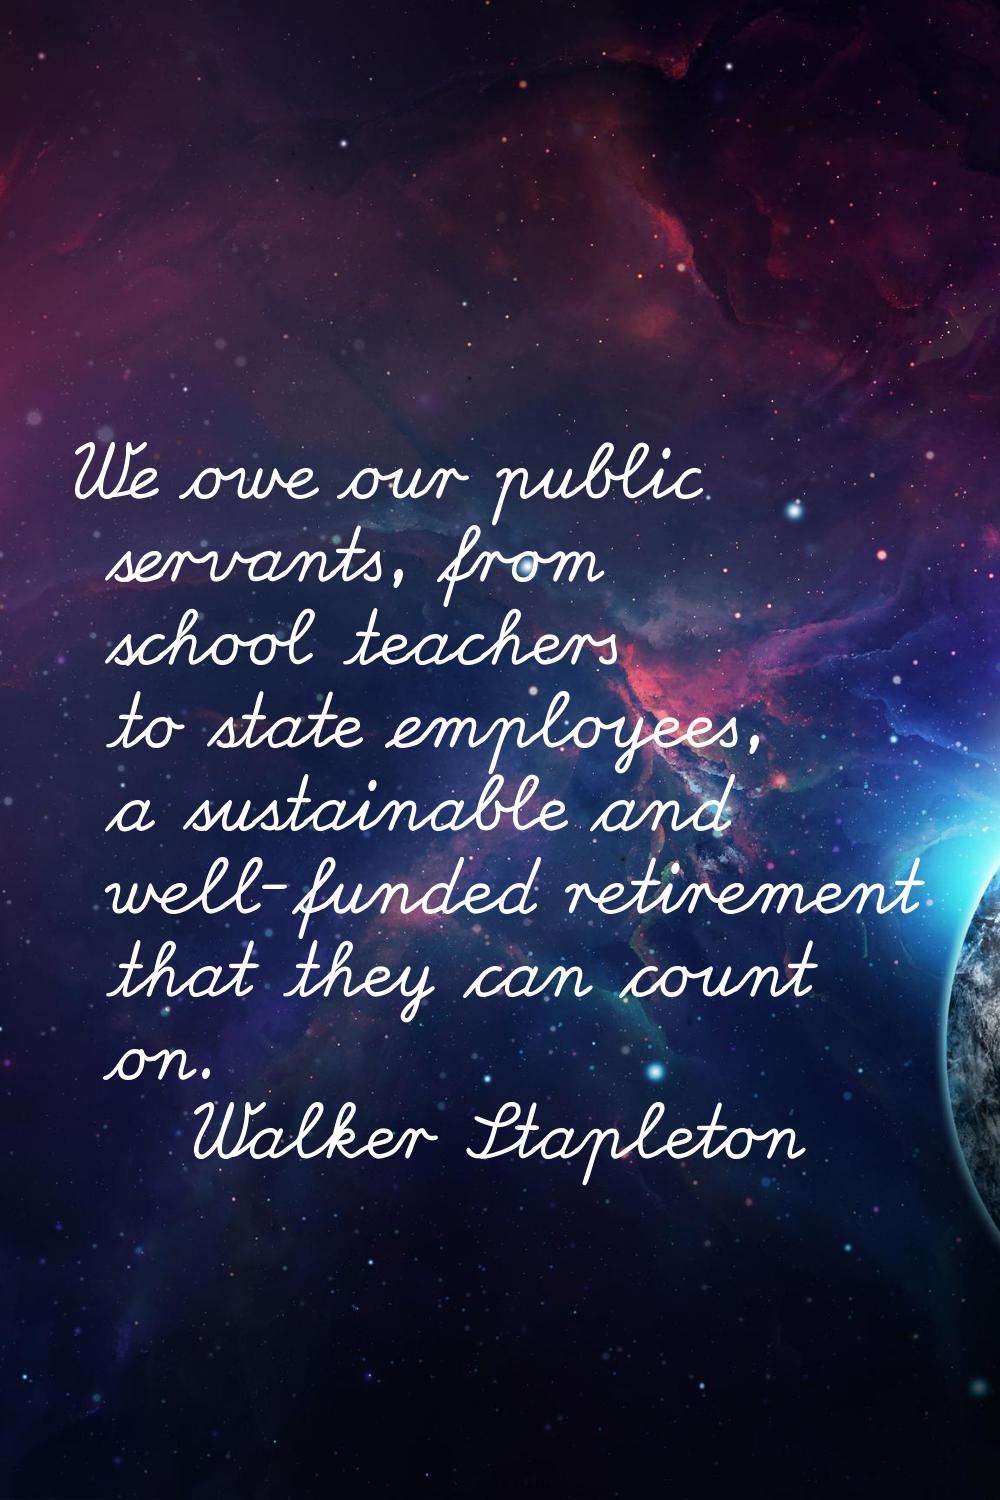 We owe our public servants, from school teachers to state employees, a sustainable and well-funded 